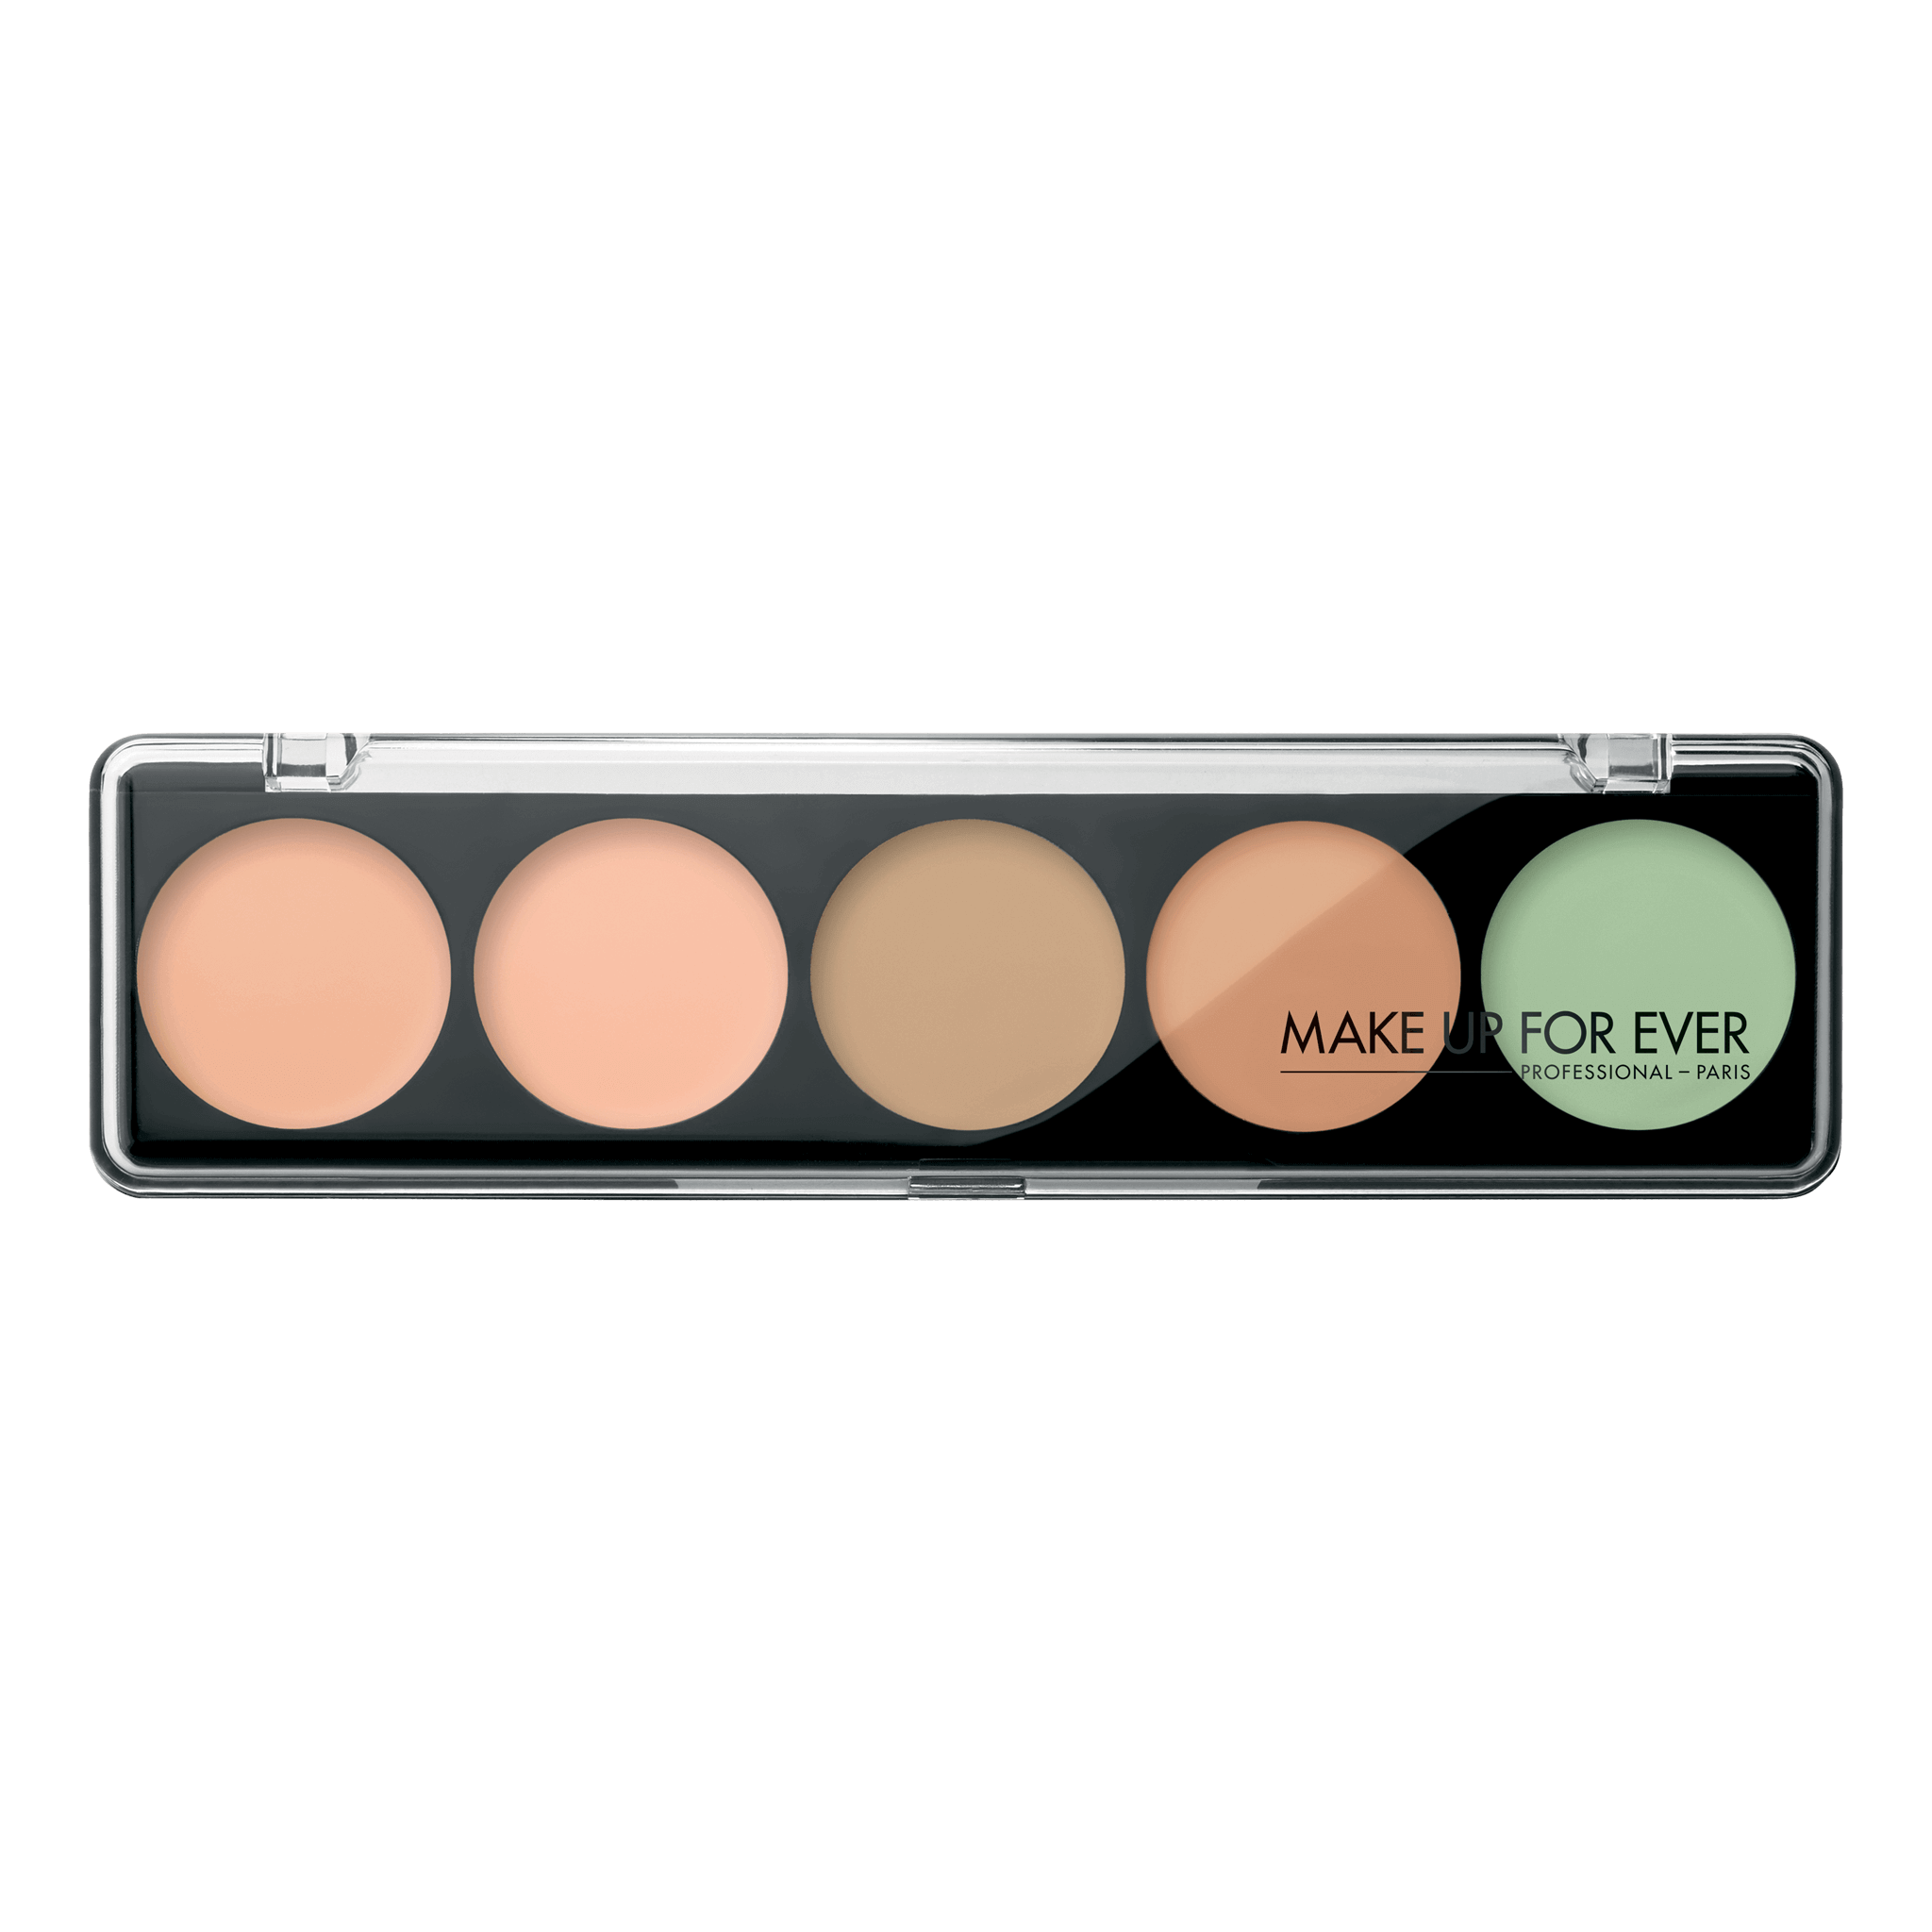 Make Up For Ever 5 Camouflage Cream Palette $370